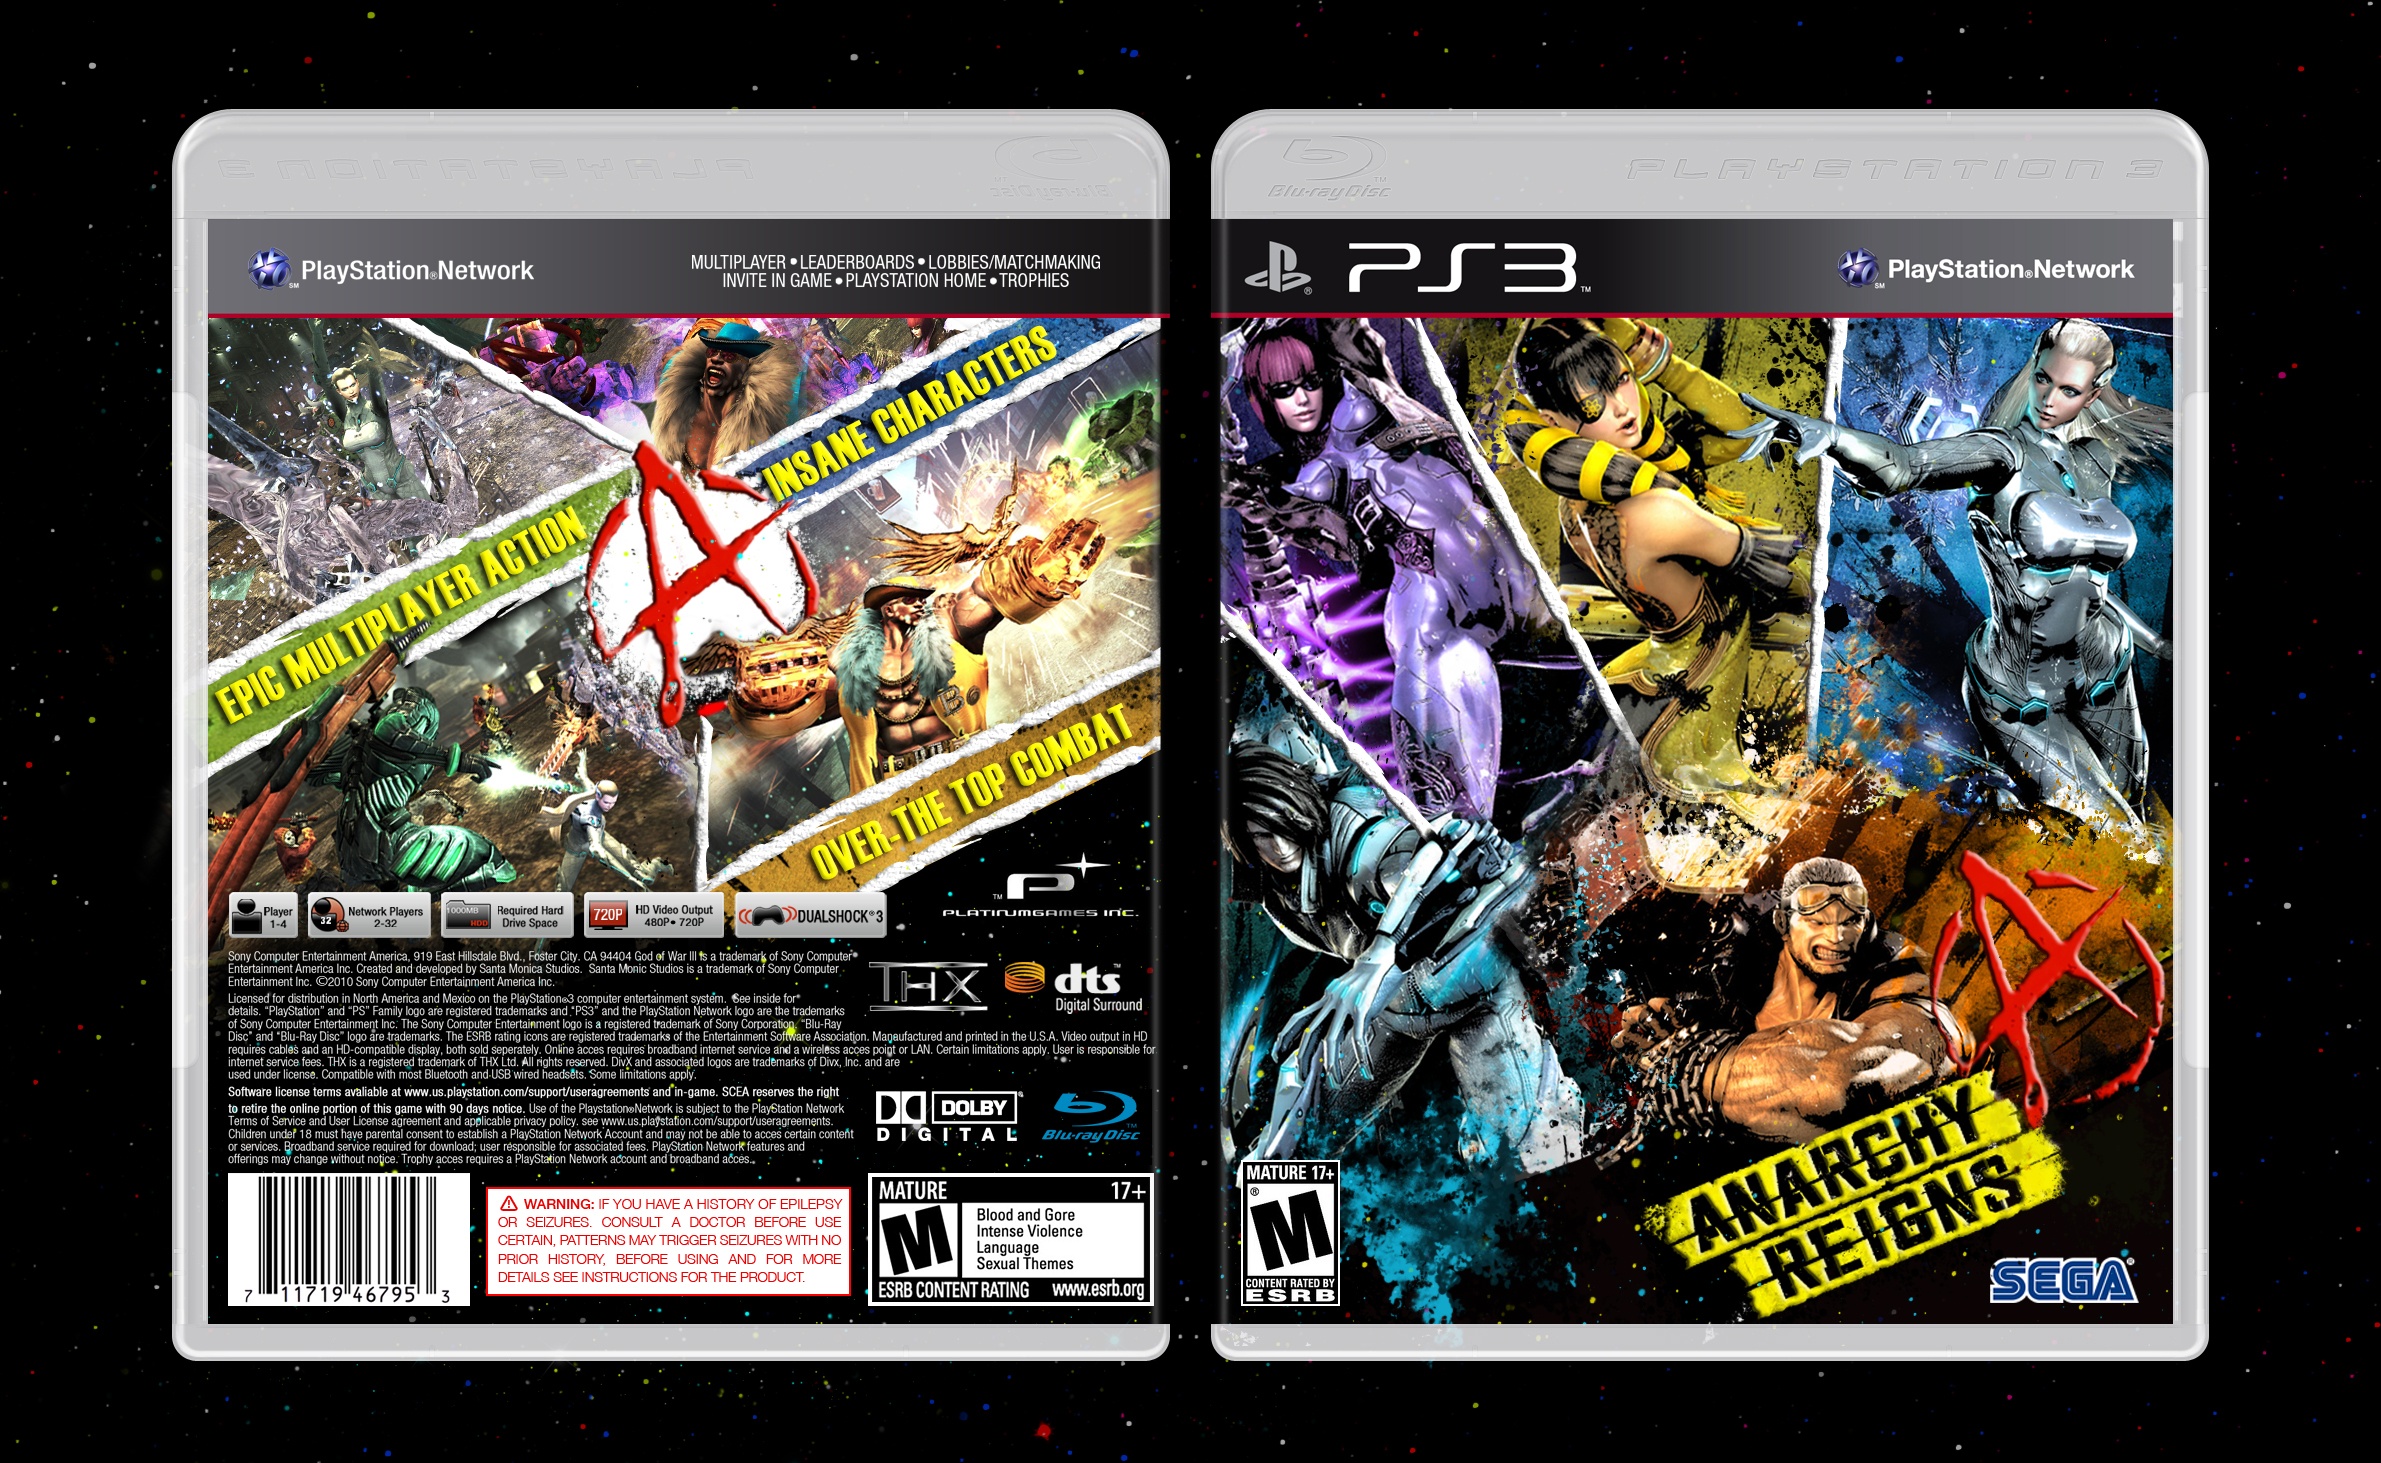 Anarchy Reigns box cover